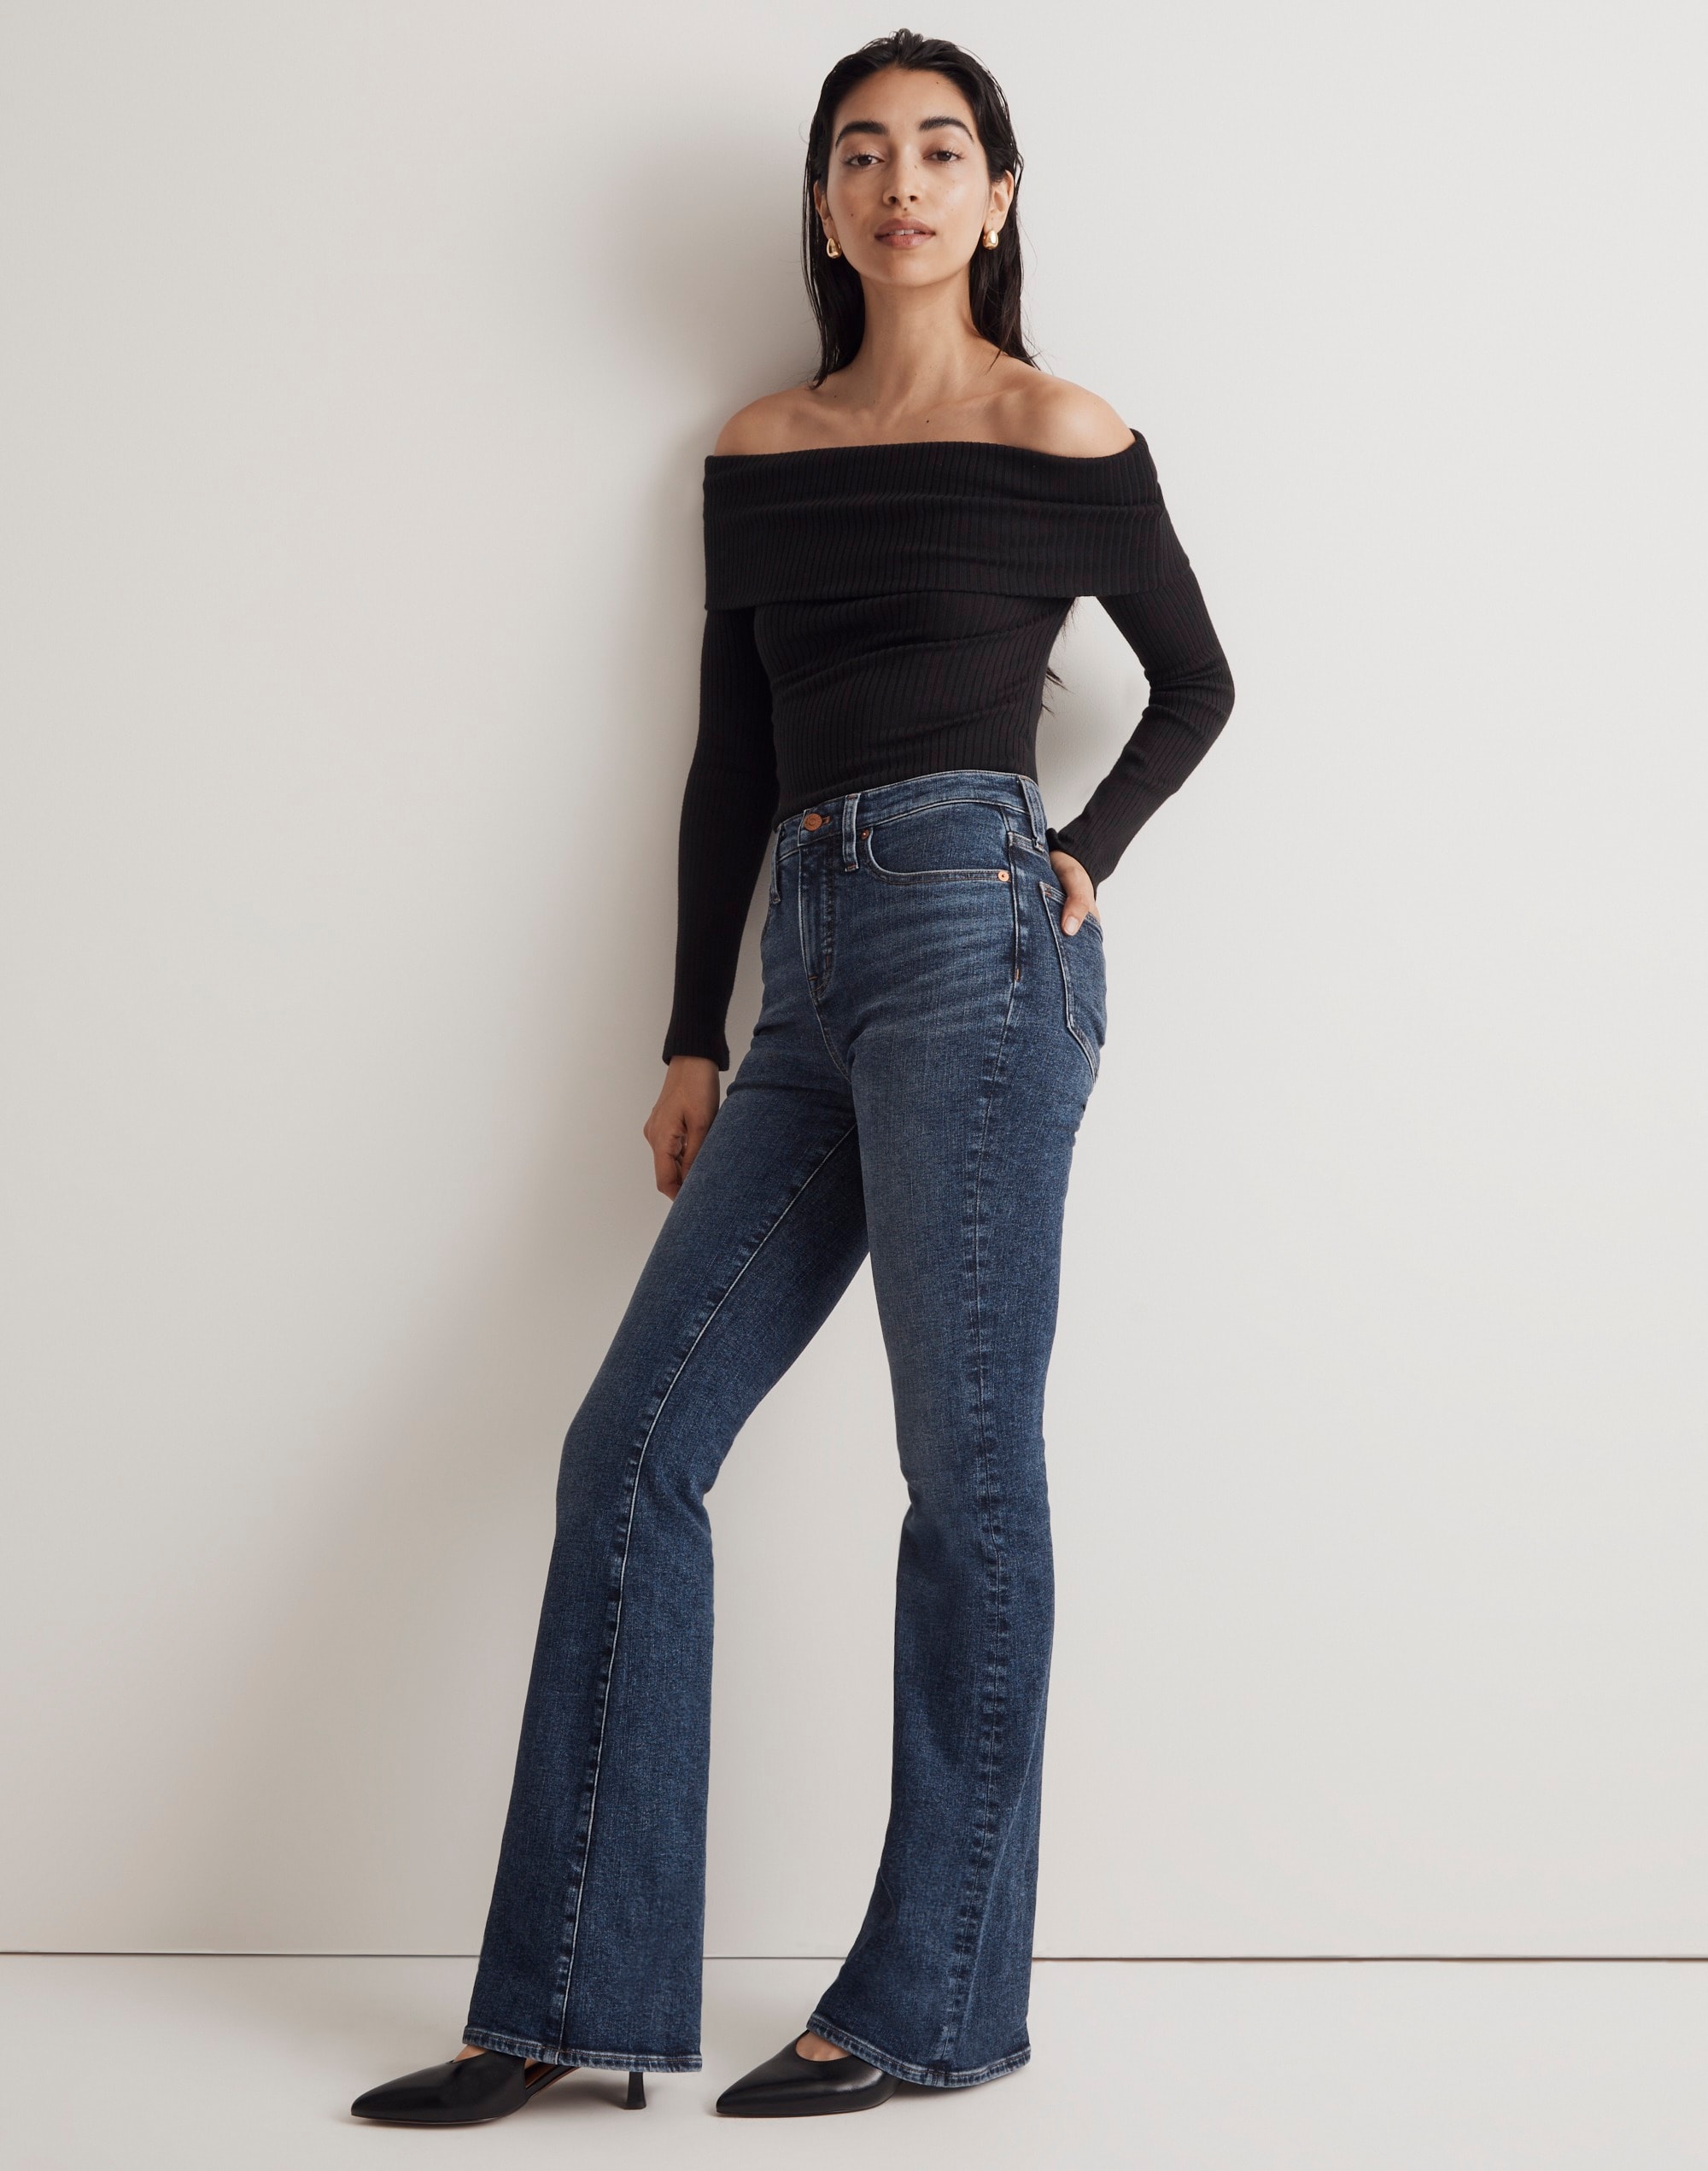 Skinny Flare Jeans in Alvord Wash: Instacozy Edition | Madewell